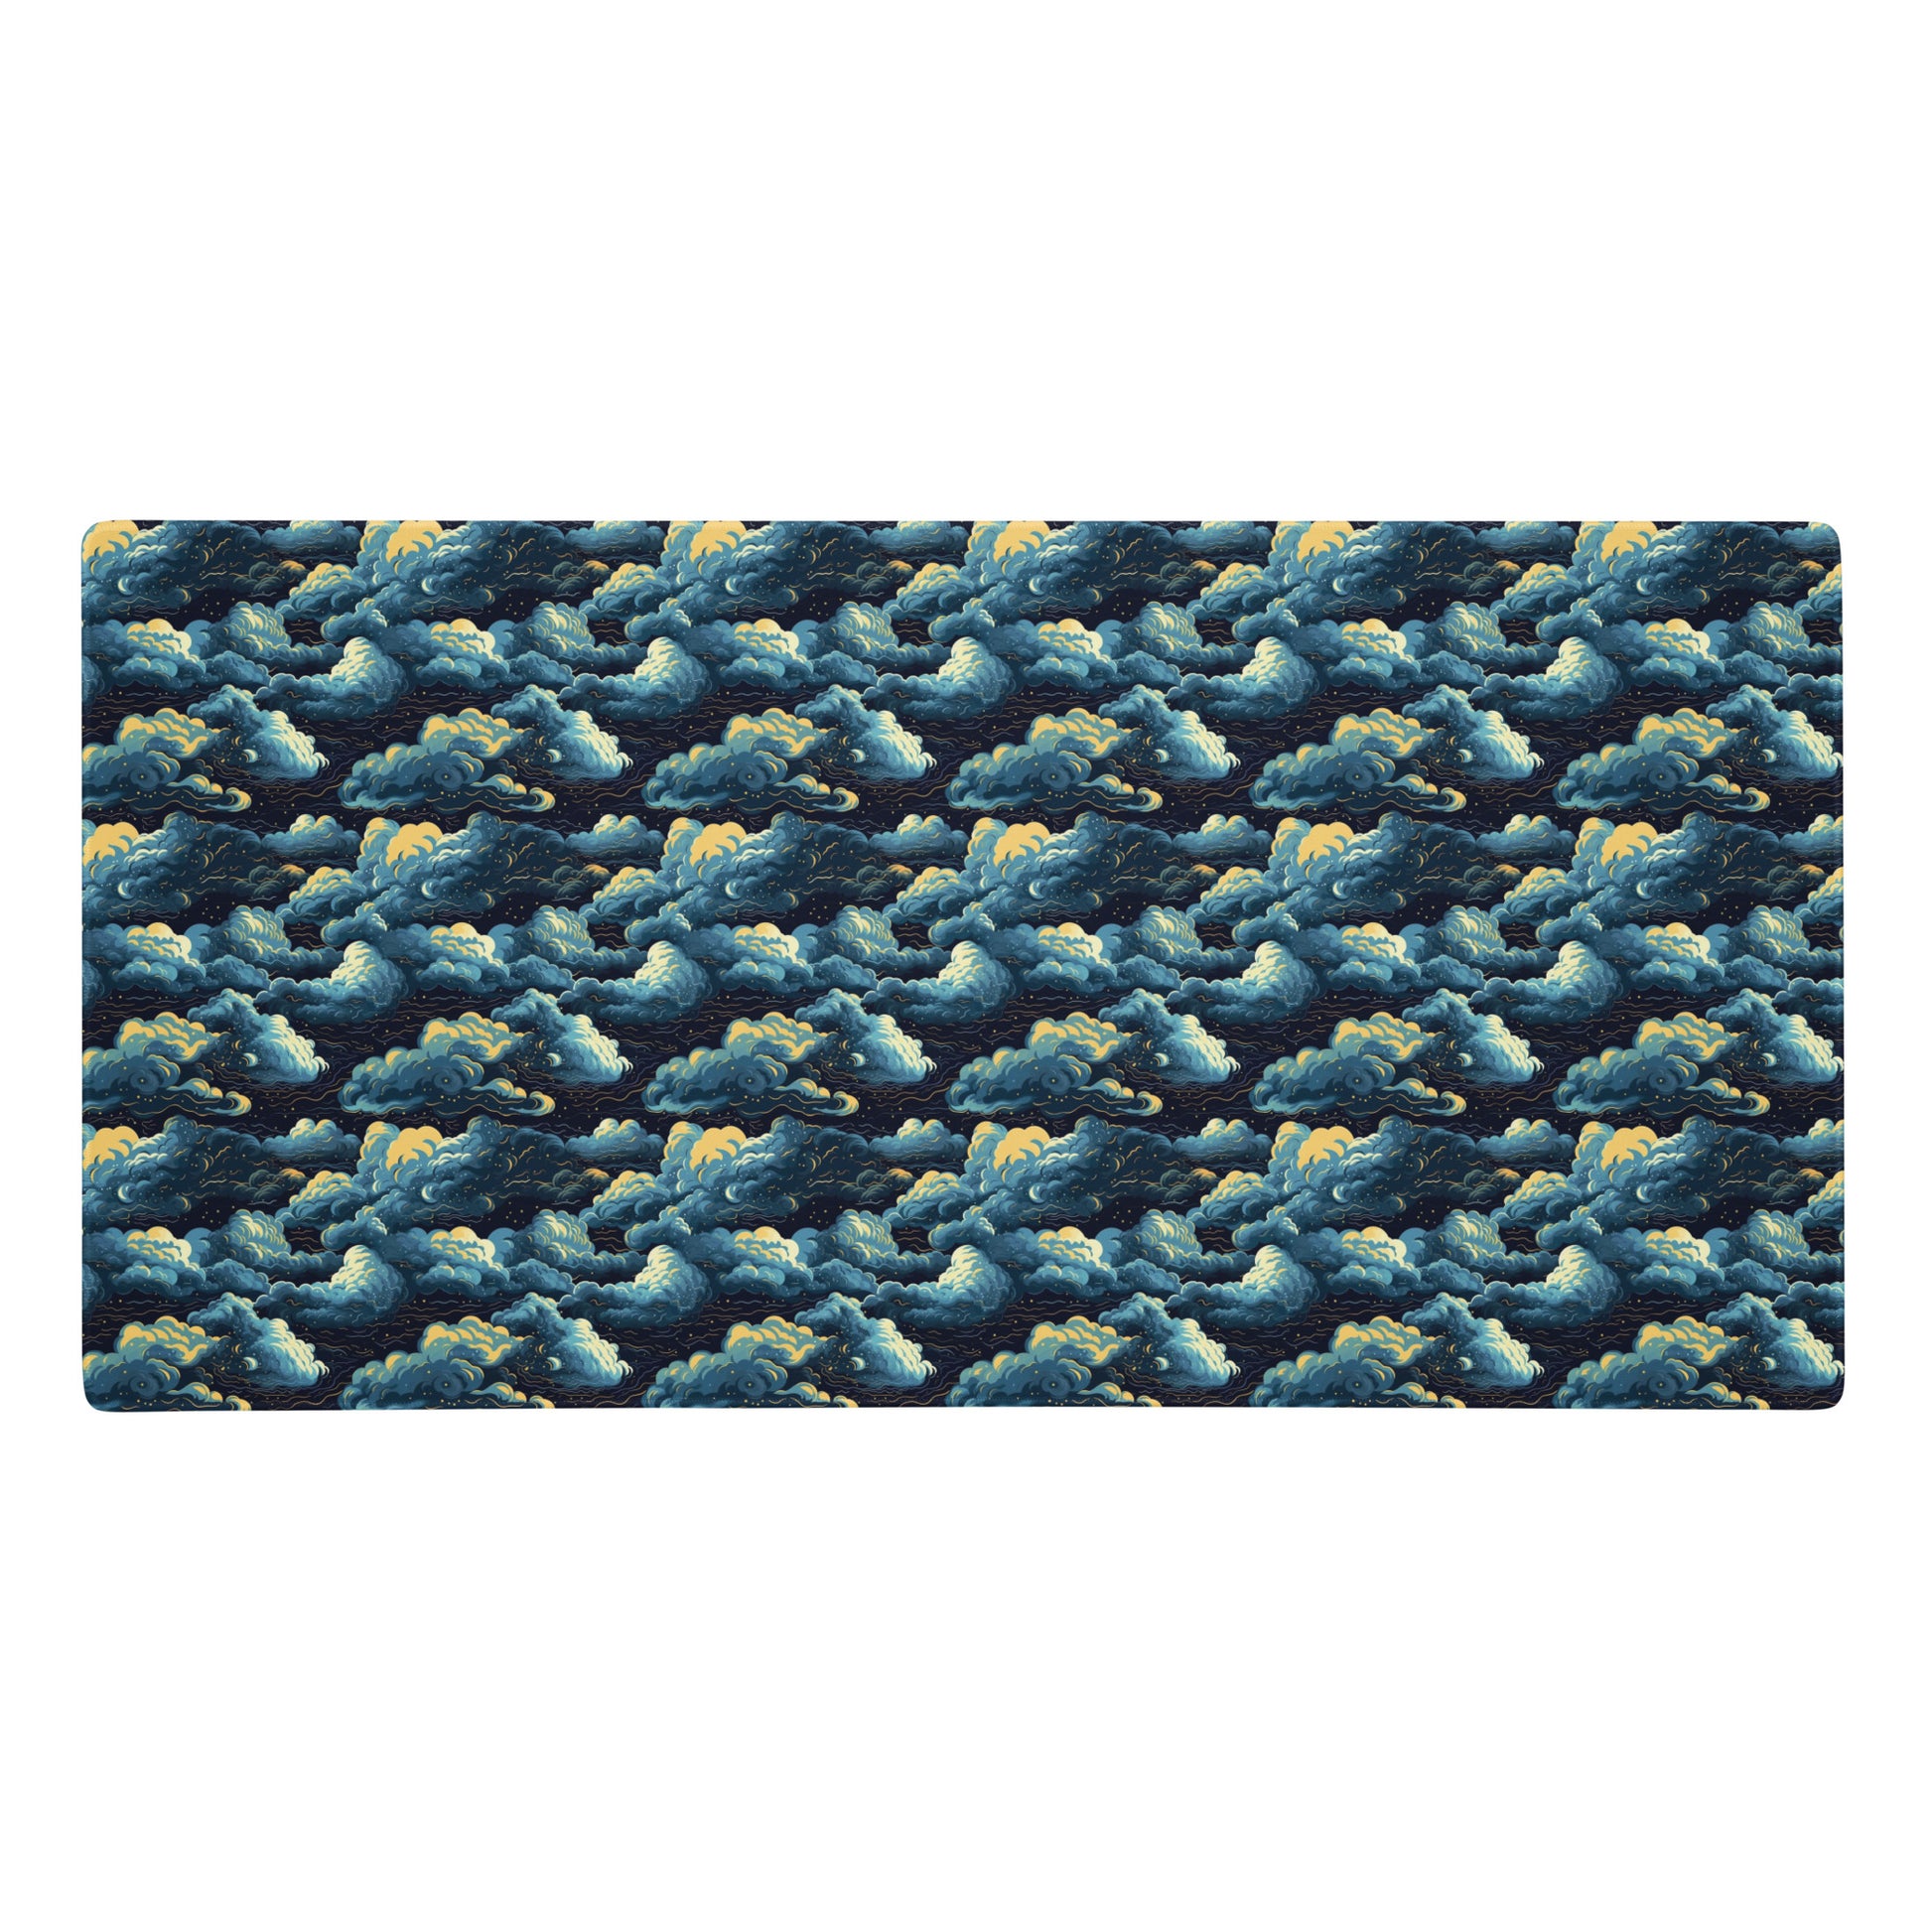 A 36" x 18" desk pad with a cloudy night sky pattern.